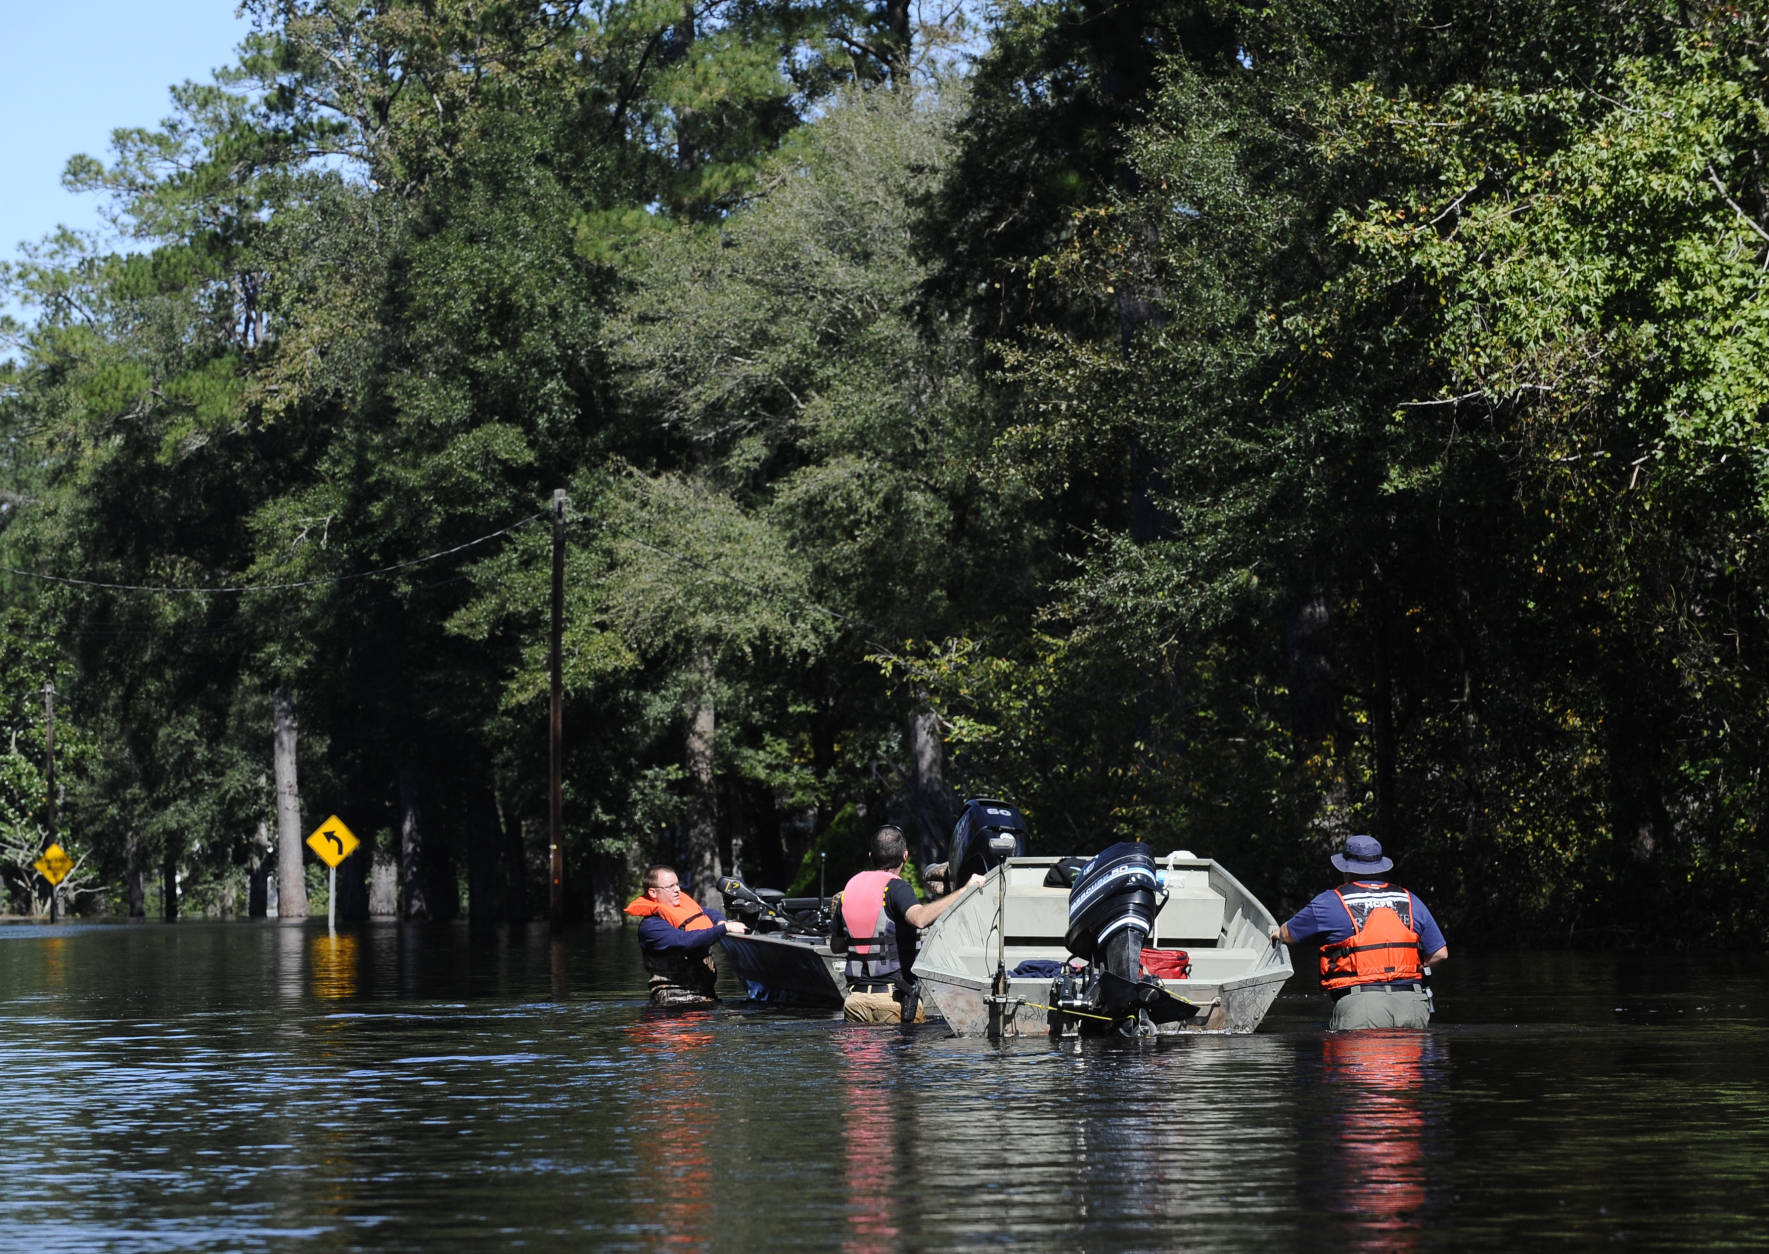 People use a boat to navigate floodwaters on Highway 9, Tuesday, Oct. 11, 2016, in Nichols, S.C. About 150 people were rescued by boats from flooding in the riverside village of Nichols on Monday. (AP Photo/Rainier Ehrhardt)